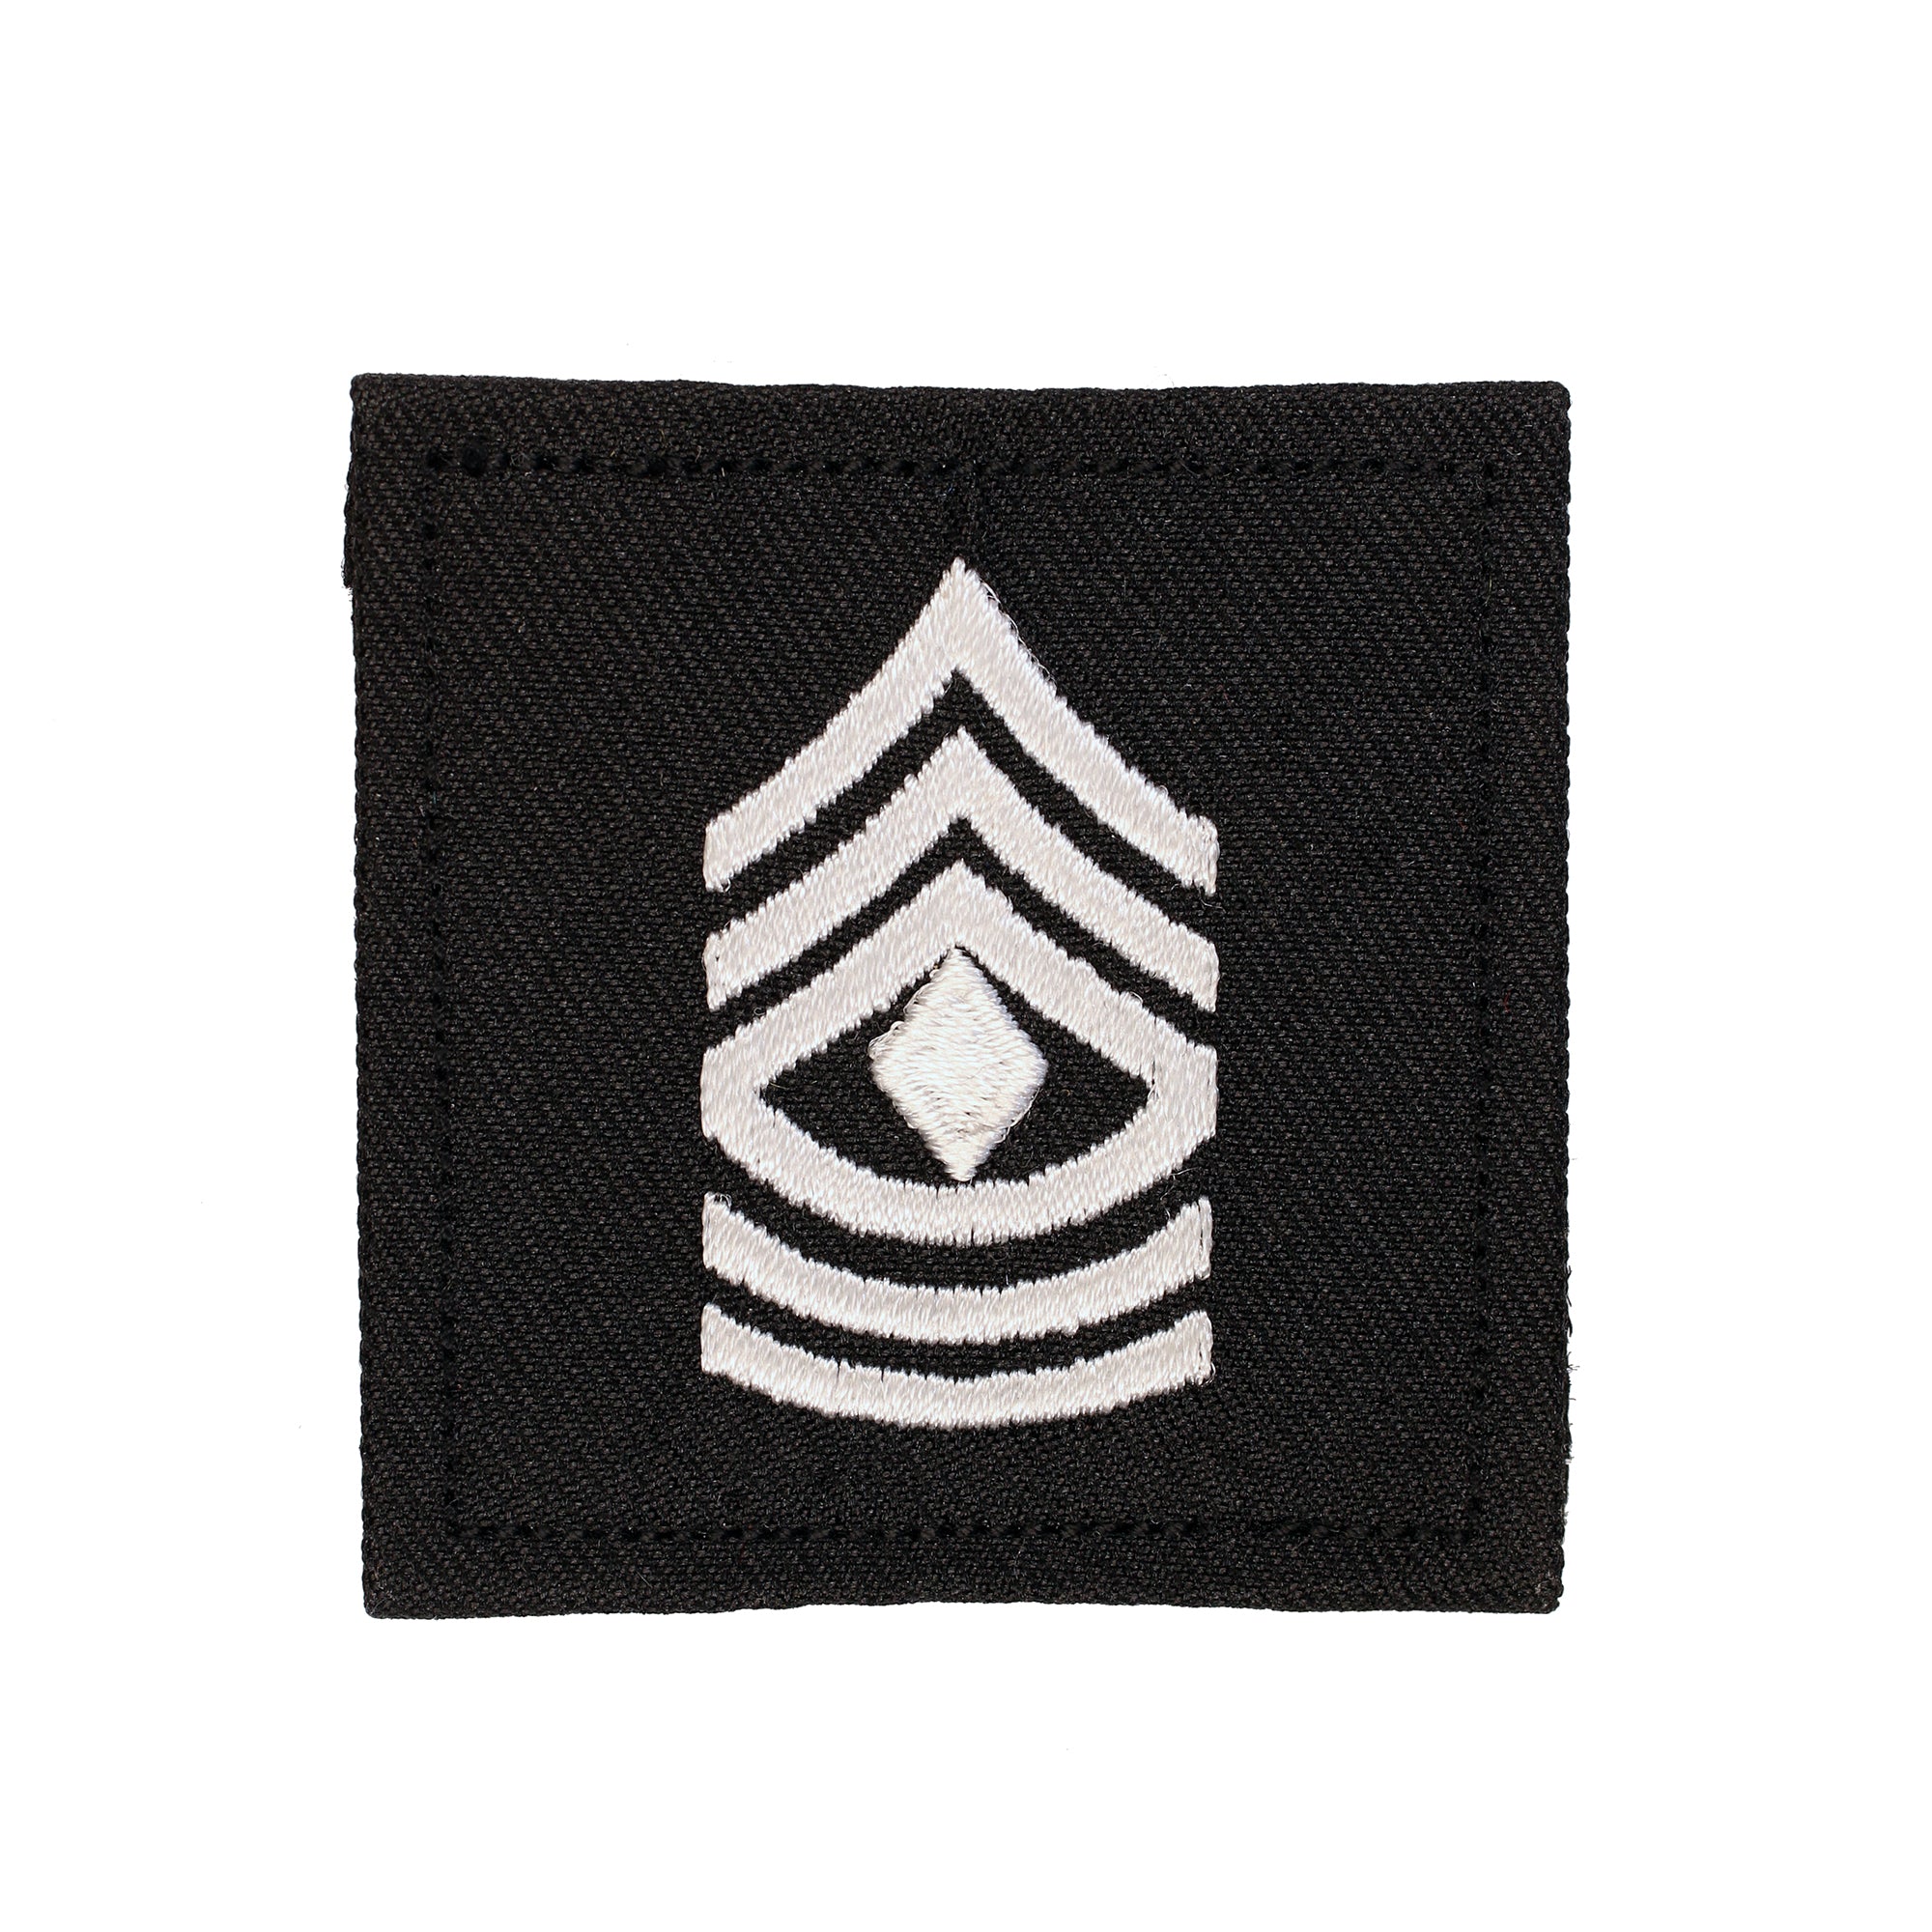 ARMY 1ST SGT 2X2 BLACK WITH HOOK FASTNER - Insignia Depot